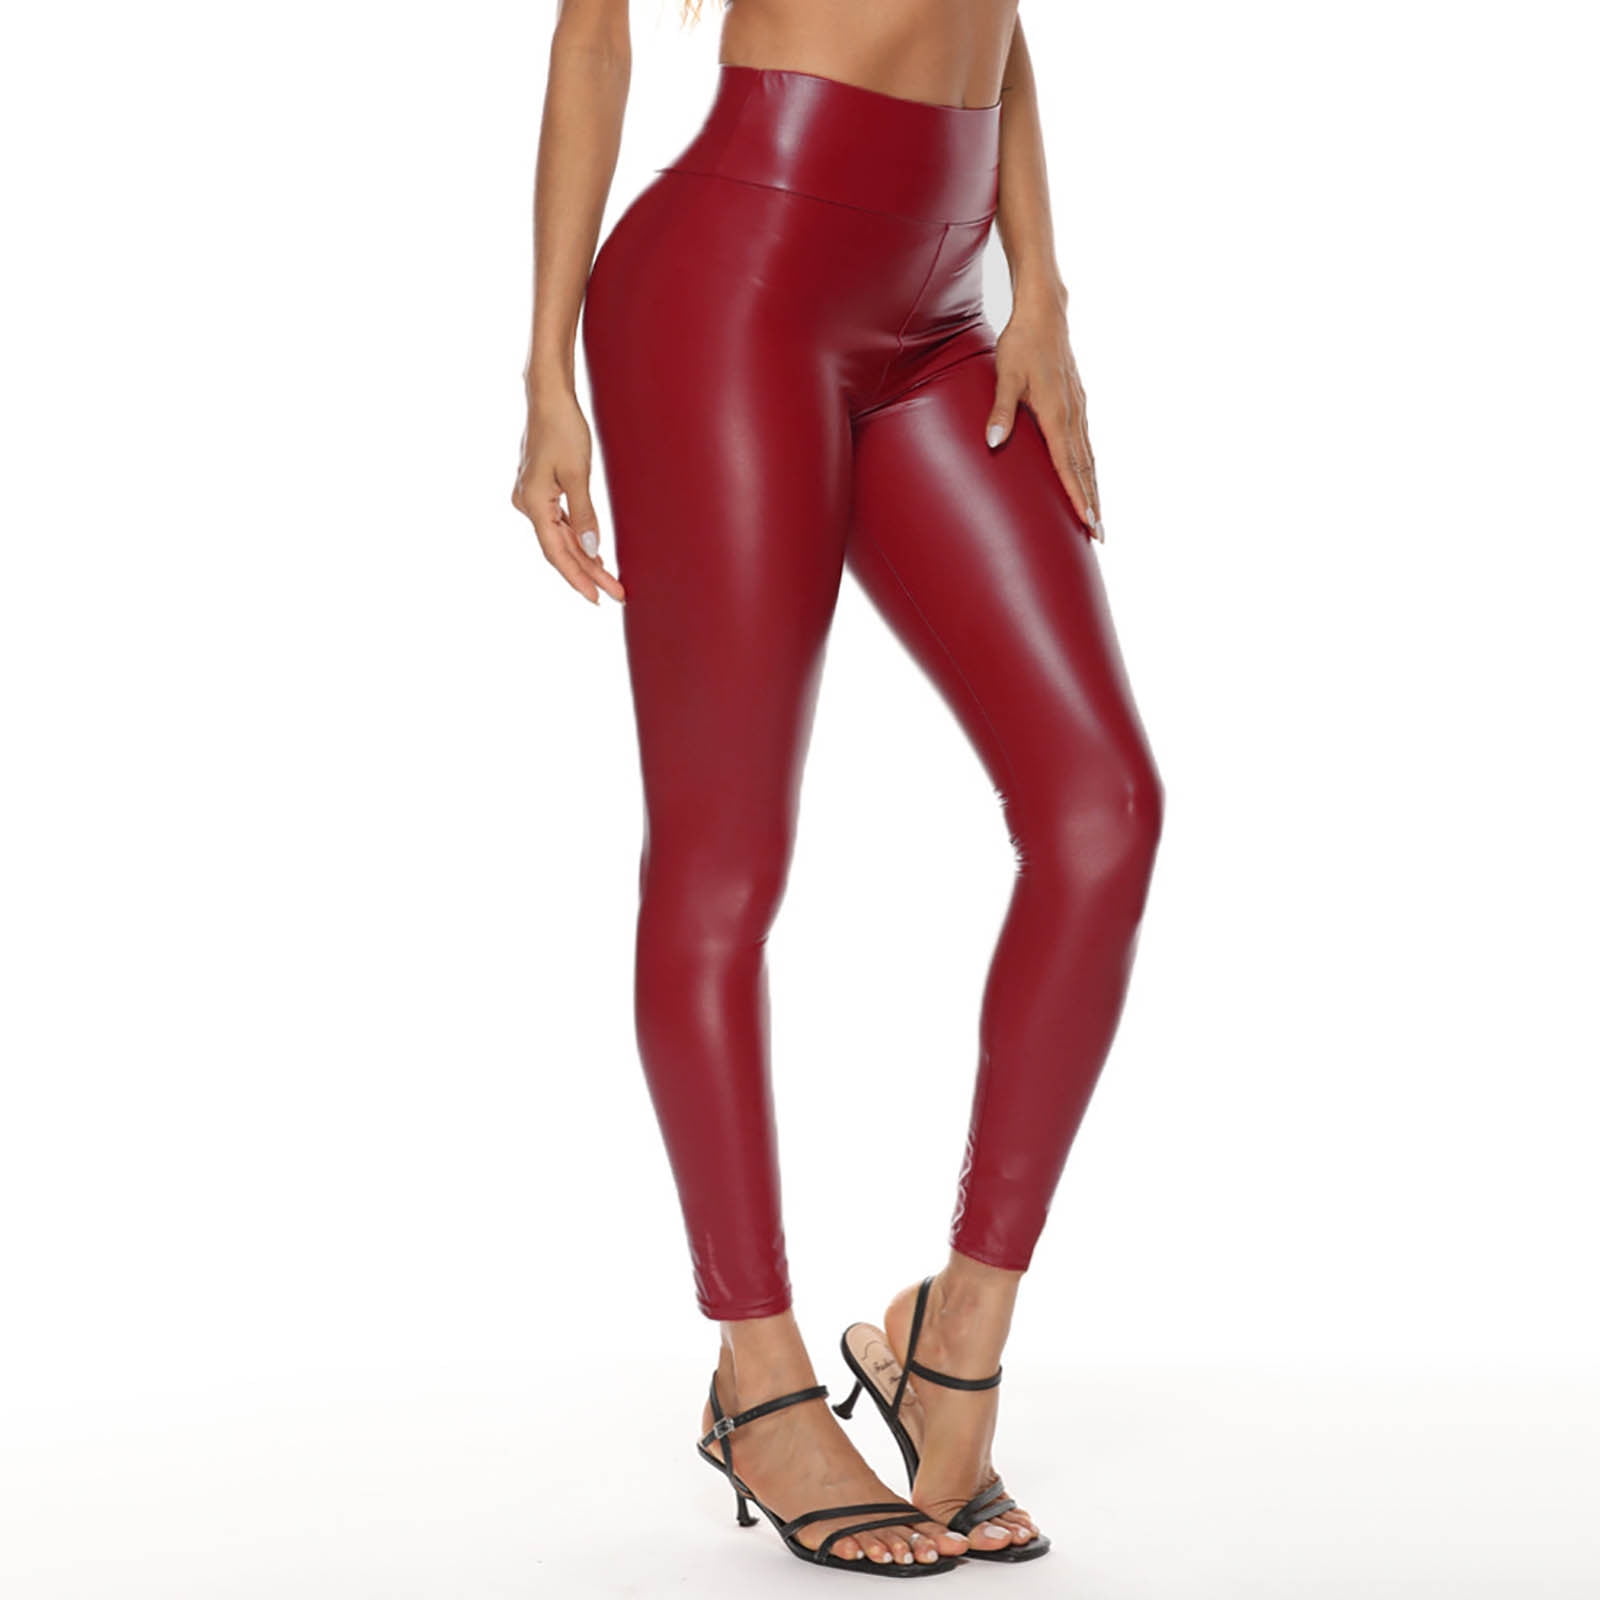 adviicd Spanx Leather Leggings For Women Womens Clothing Ribcage